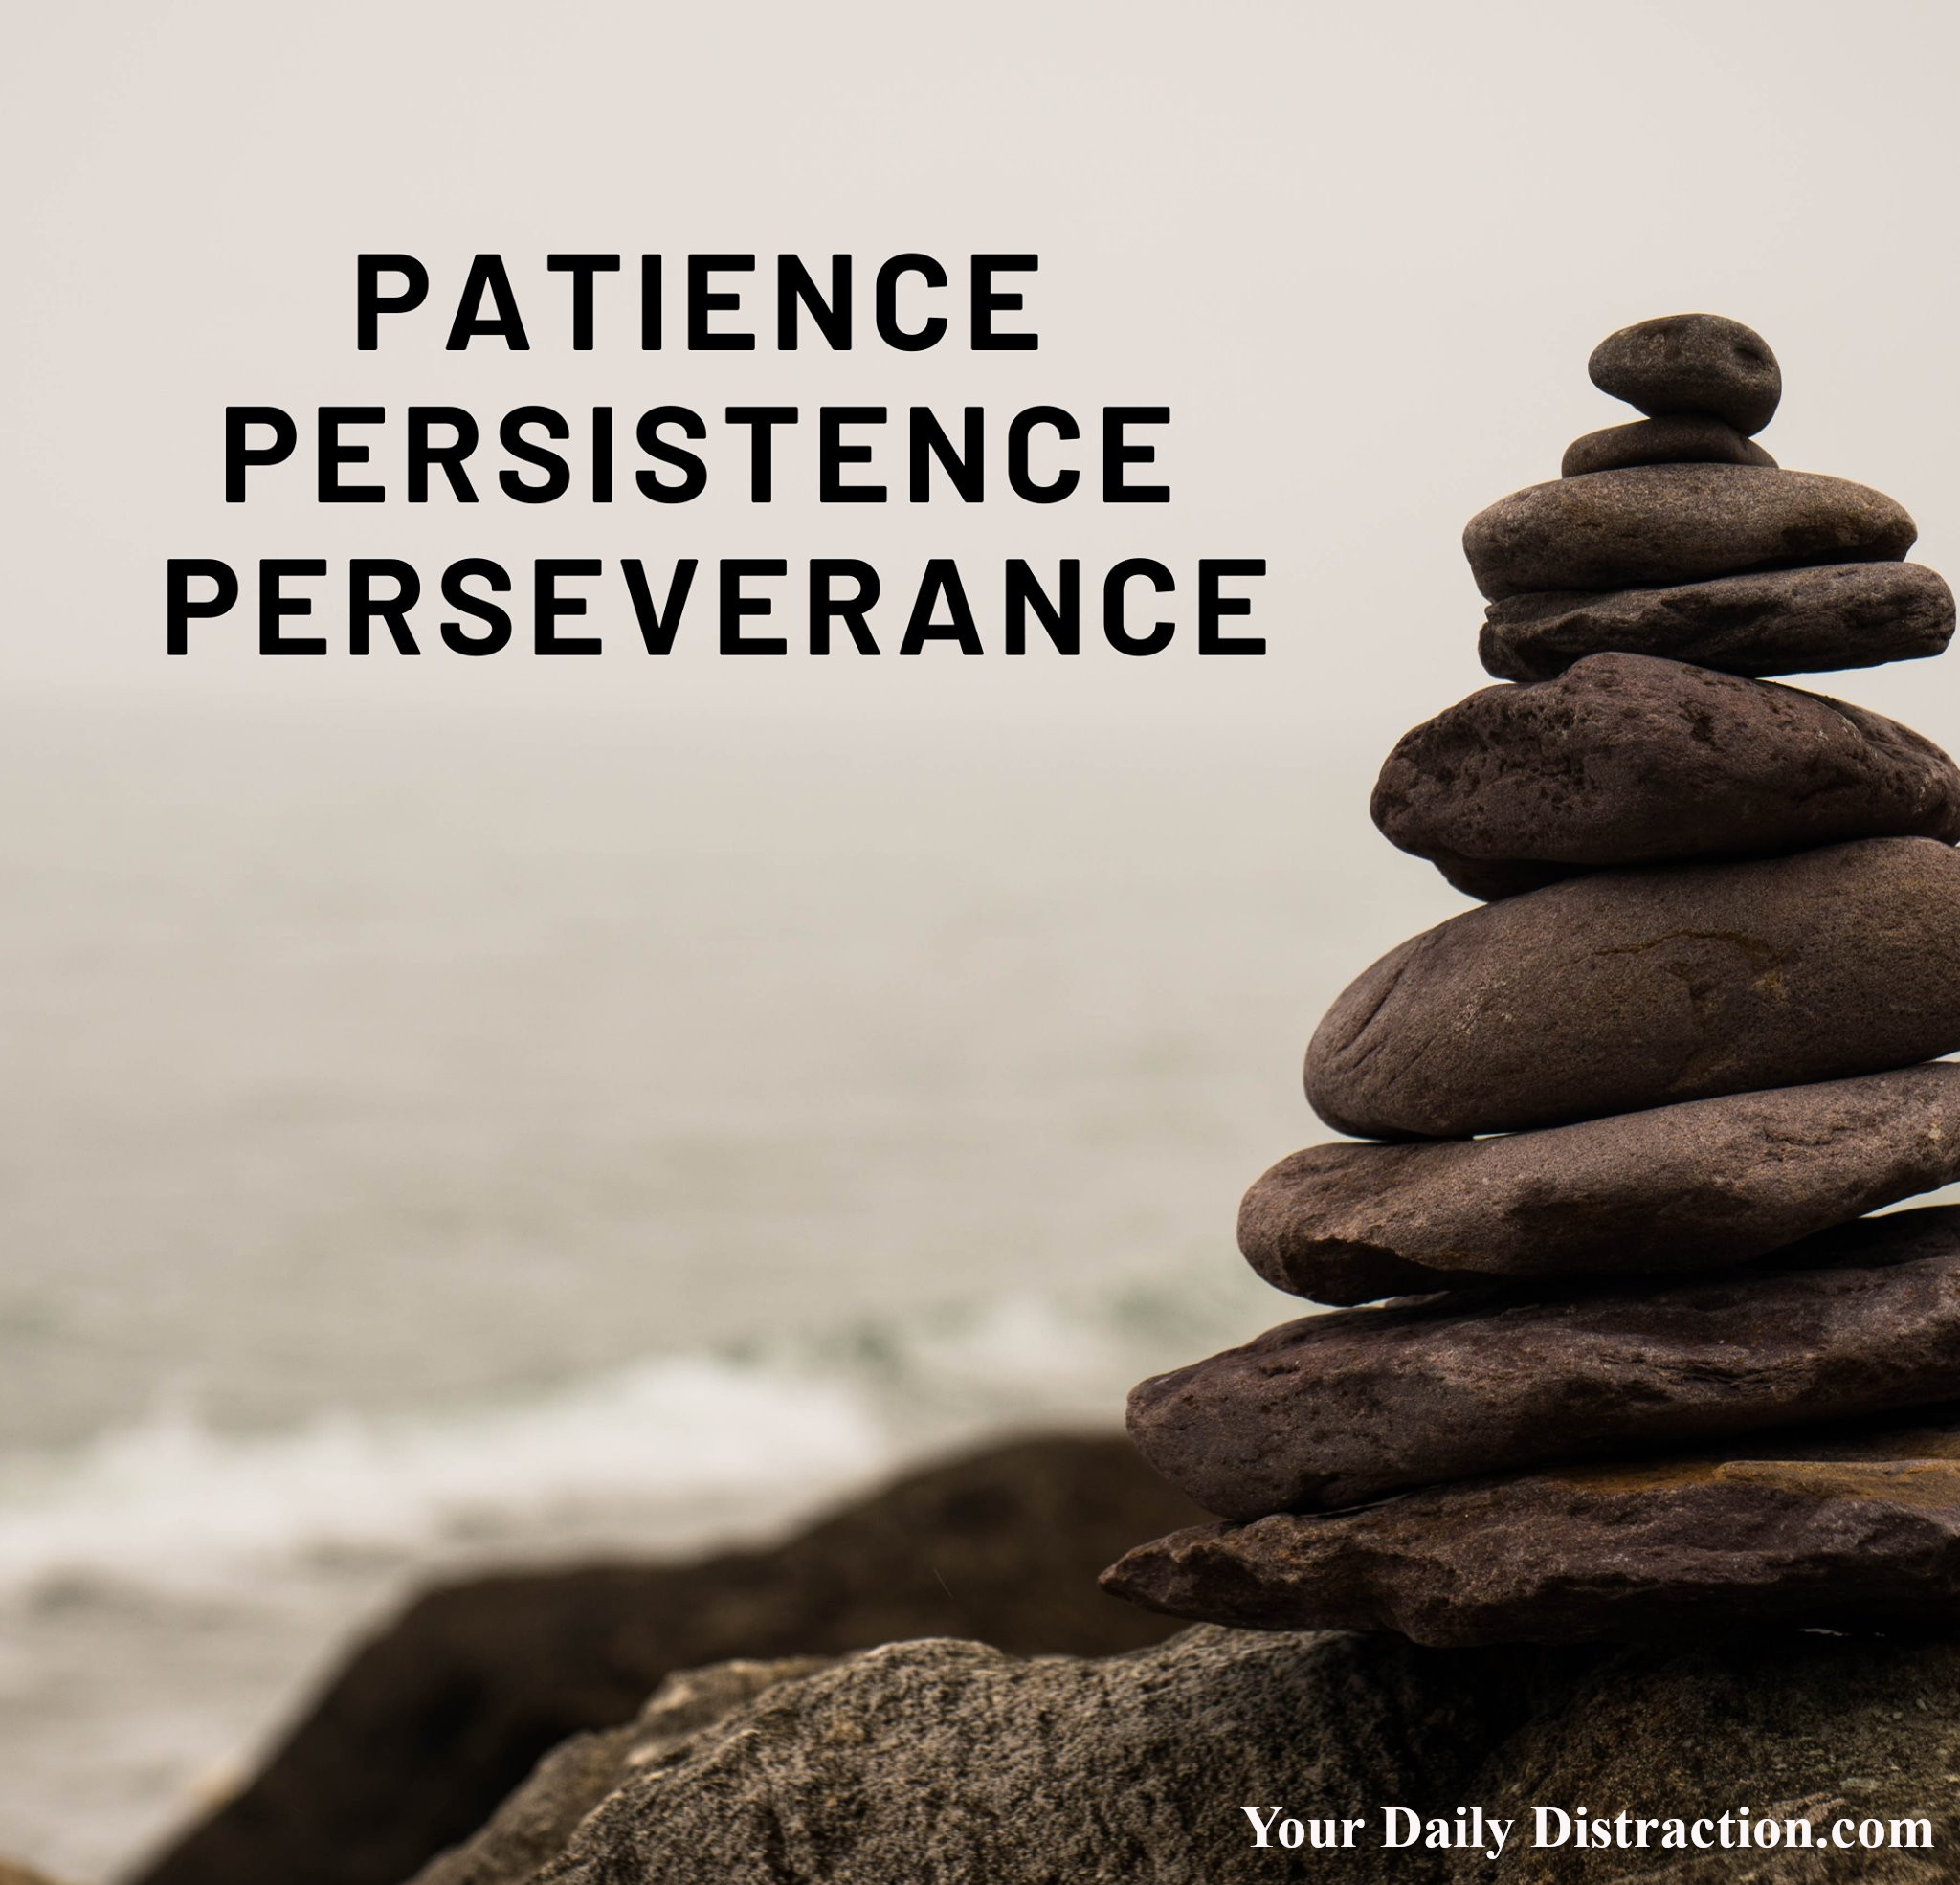 short speech on patience and perseverance